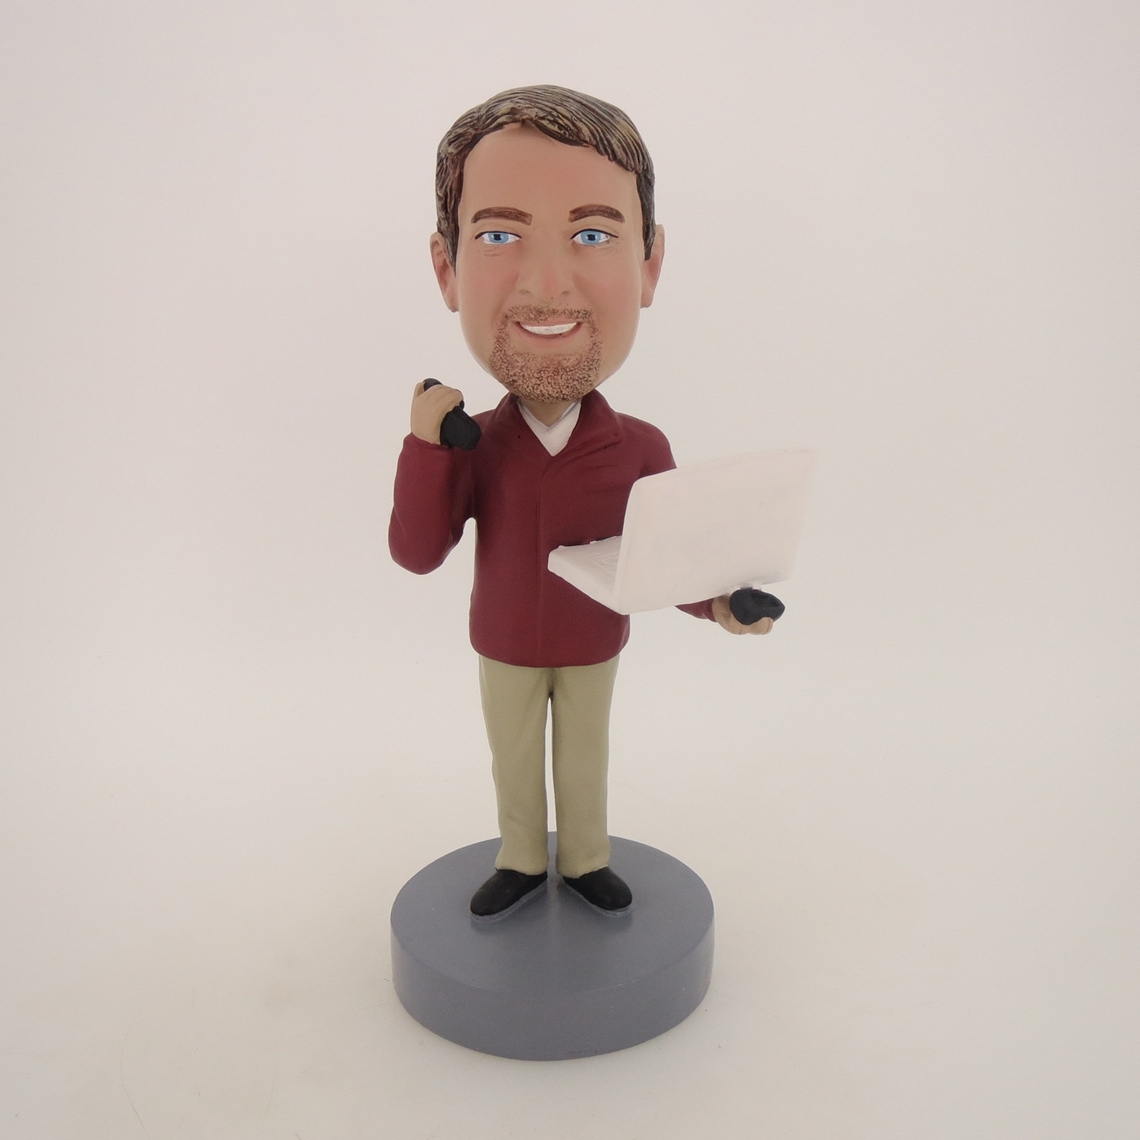 Picture of Custom Bobblehead Doll: Man With Laptop